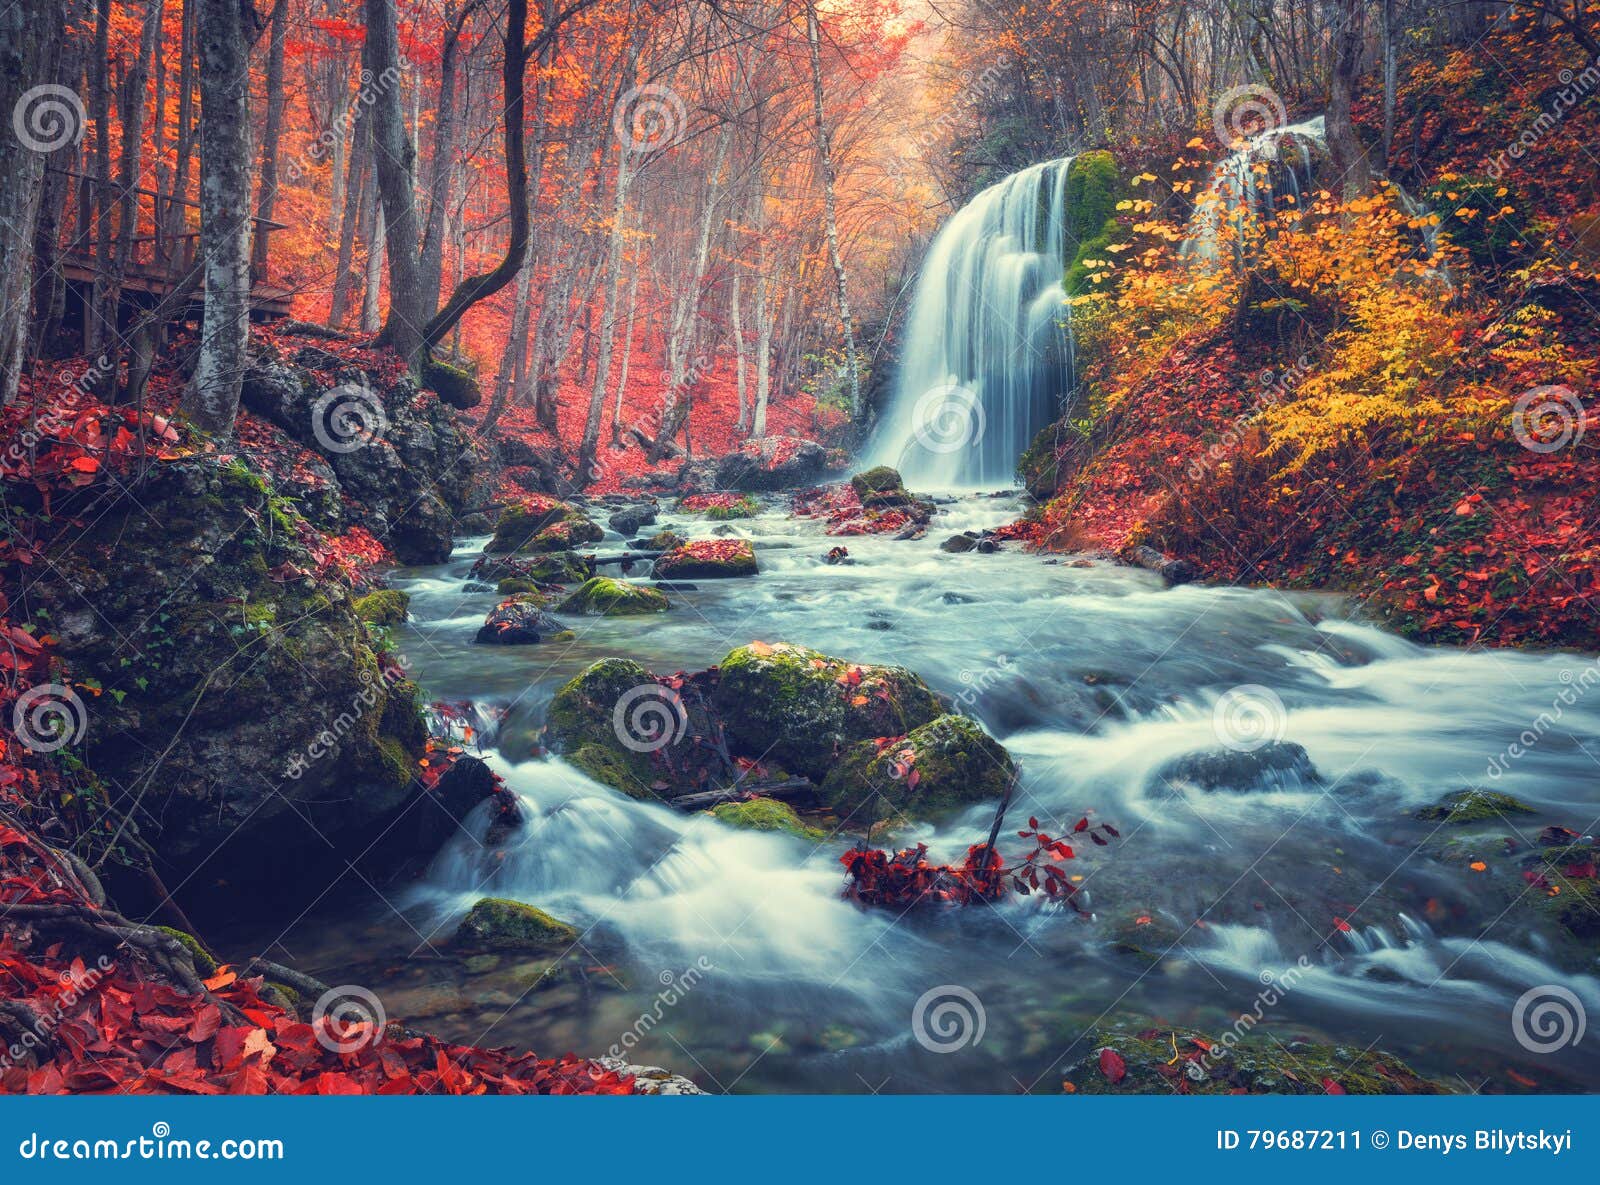 Autumn Forest With Waterfall At Mountain River At Sunset Stock Image